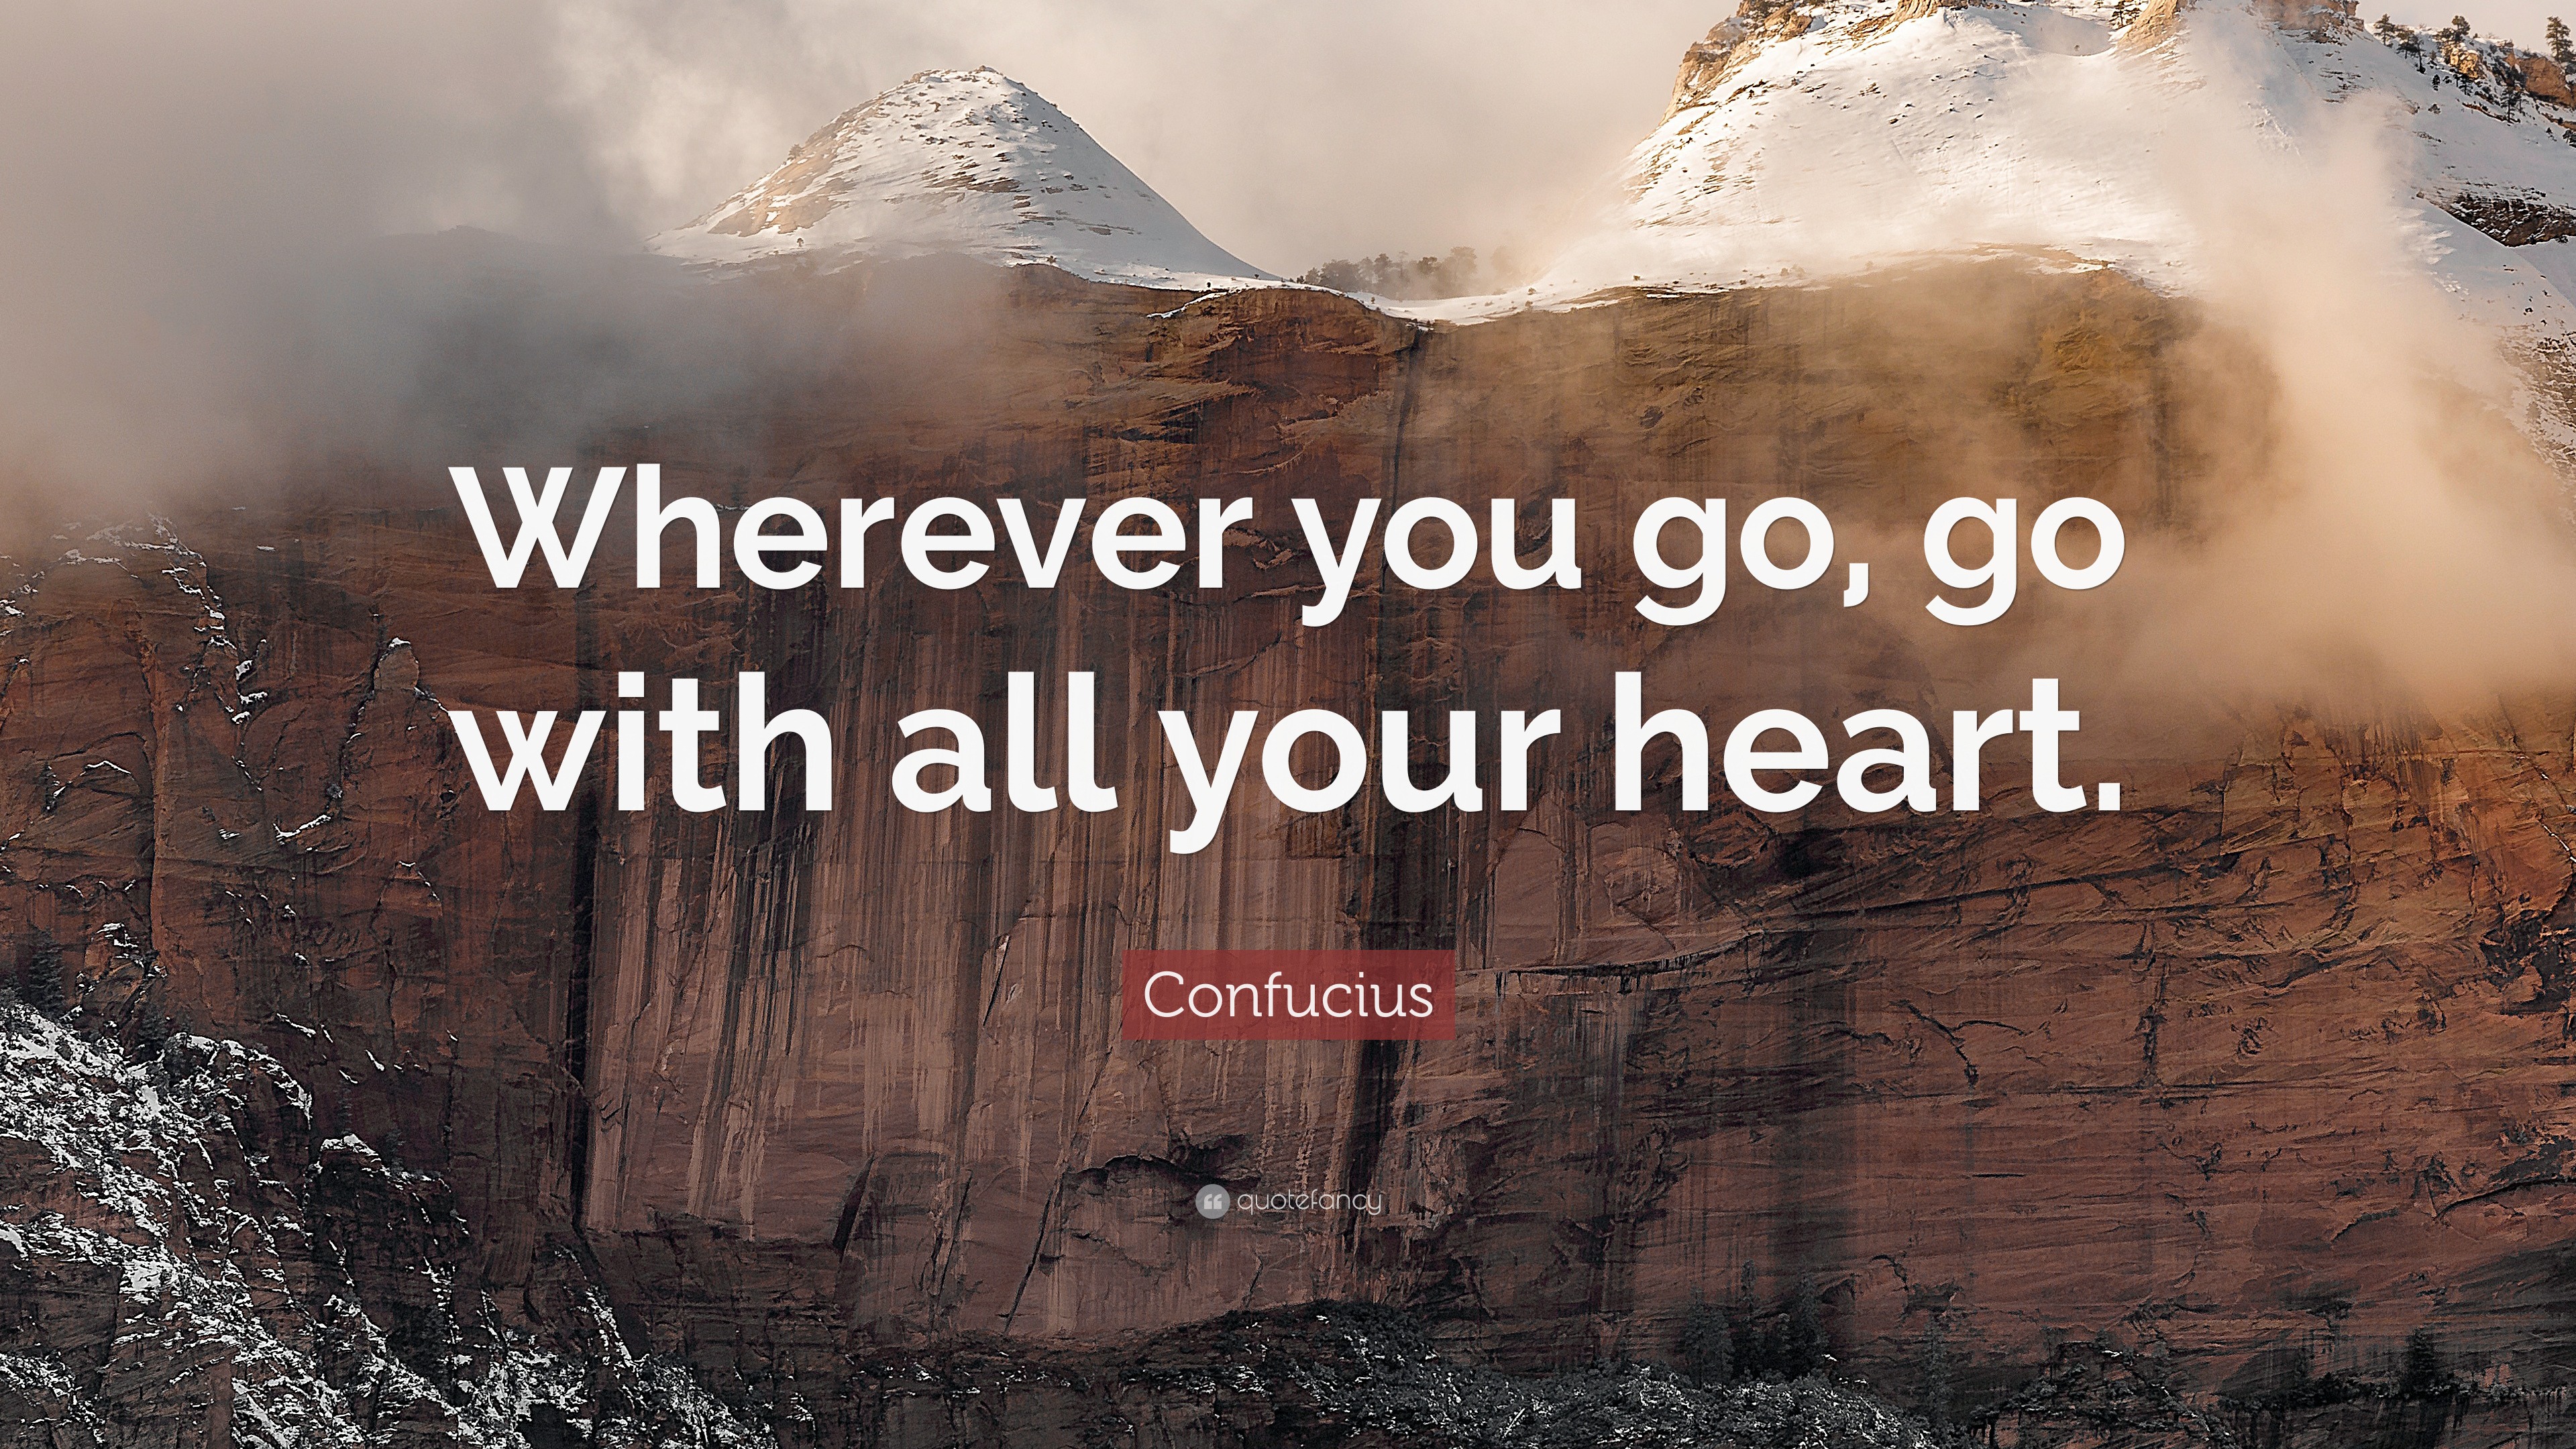 Confucius Quote “Wherever you go go with all your heart ”